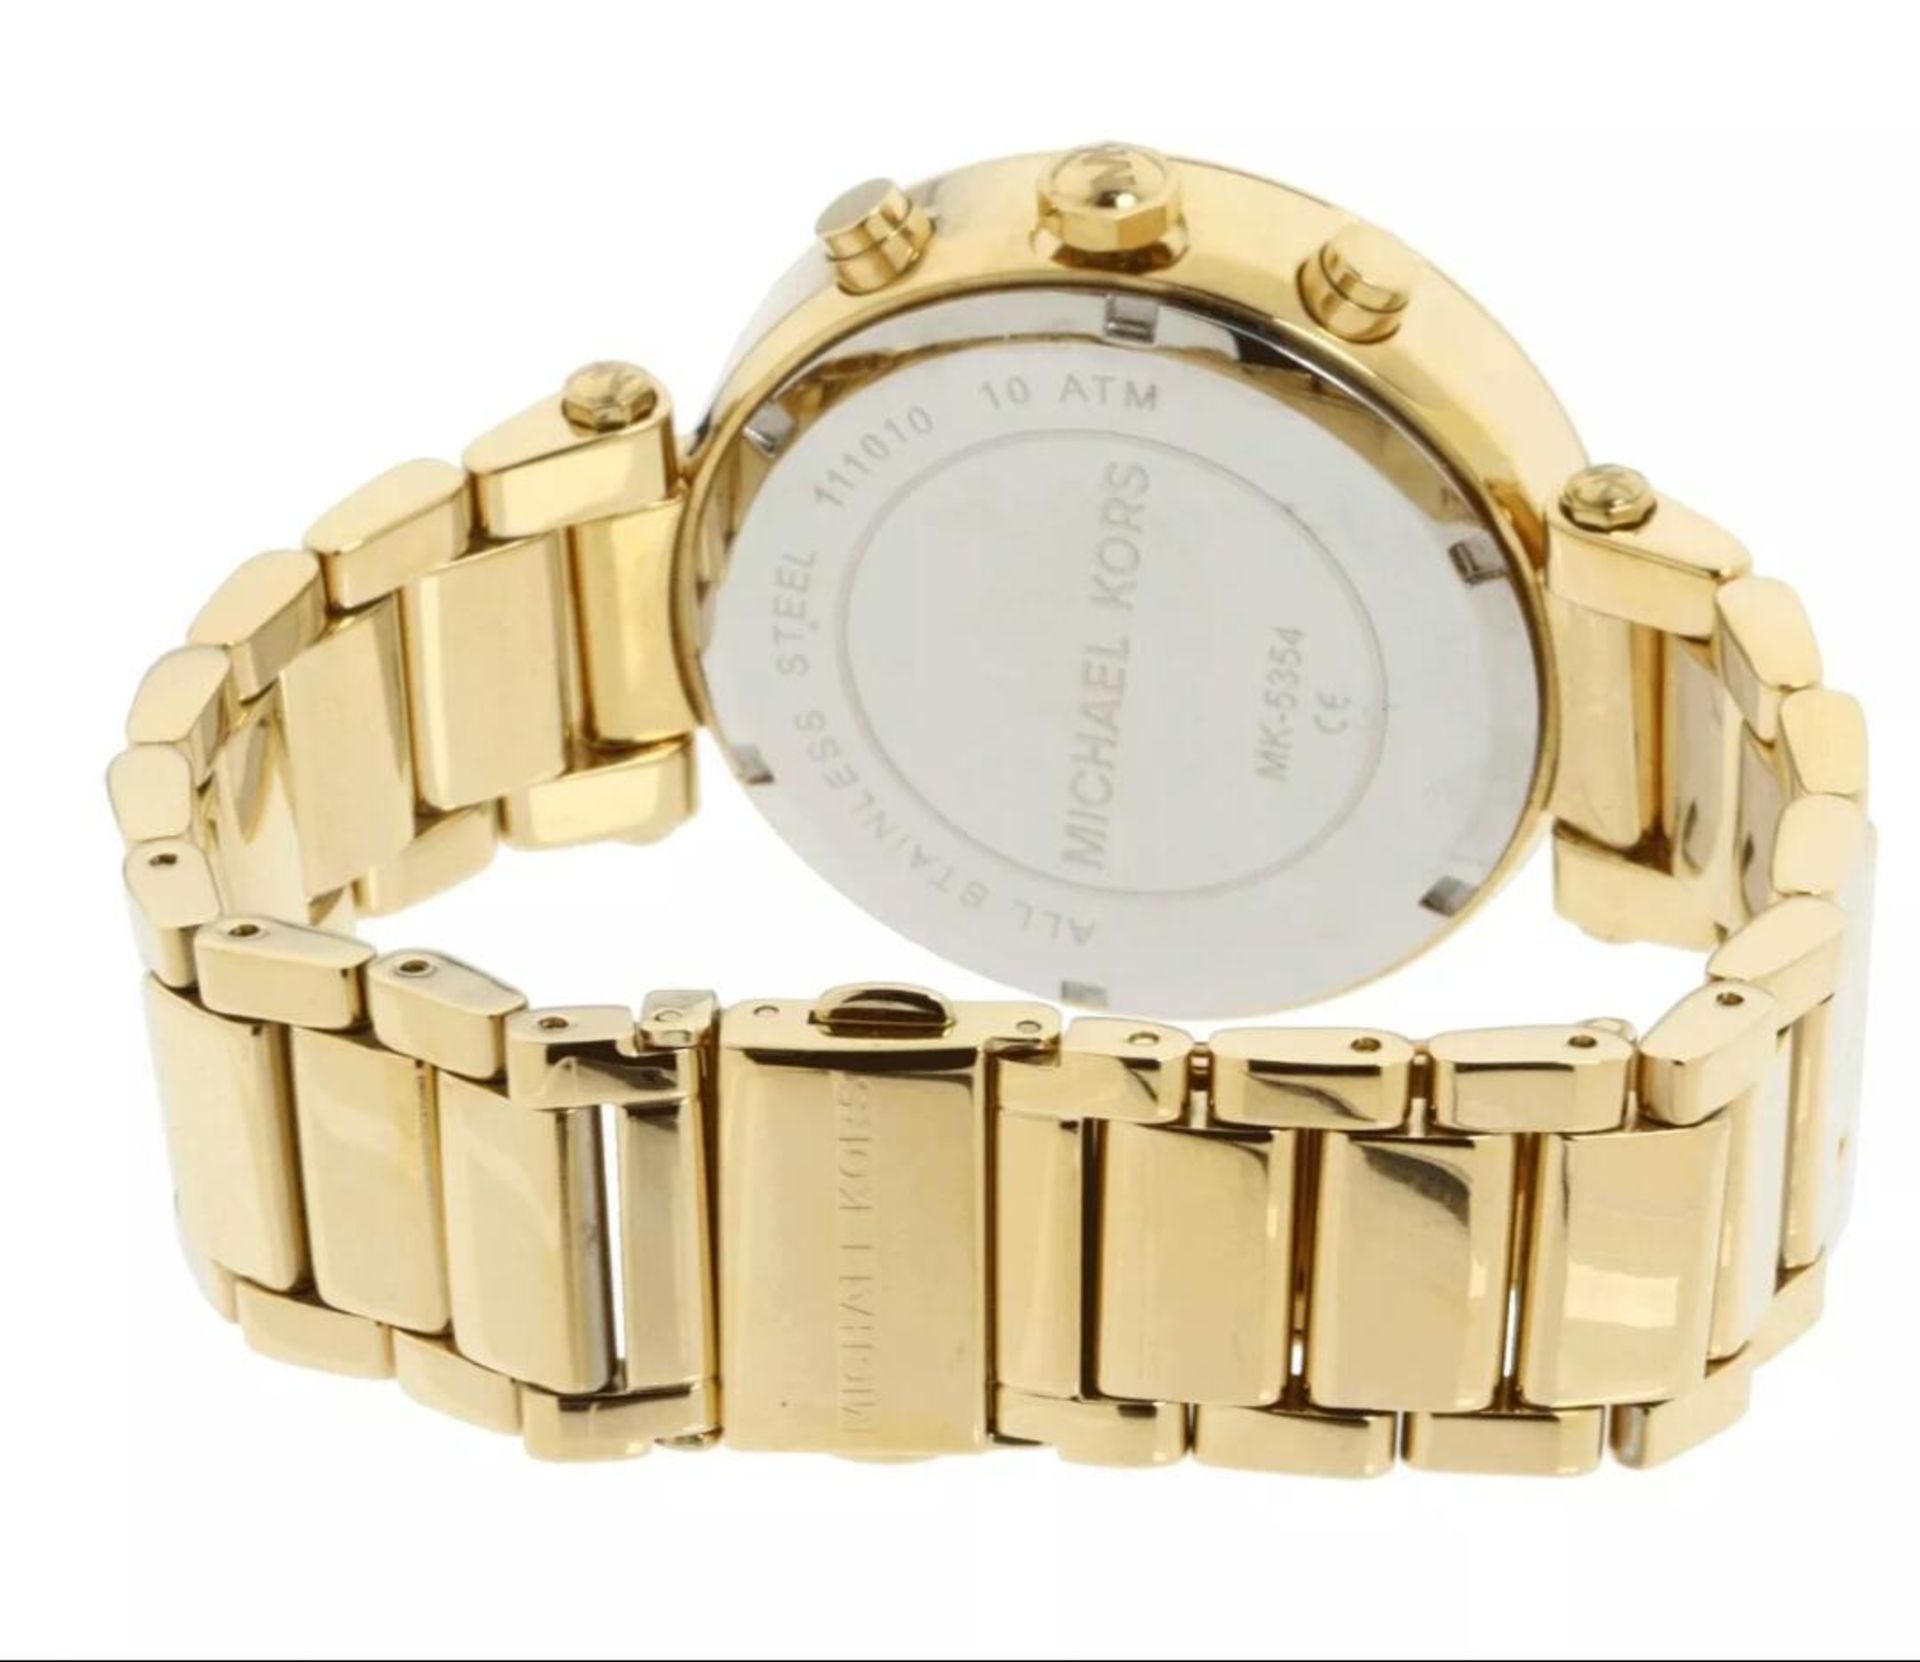 BRAND NEW MICHAEL KORS MK5354 LADIES DESIGNER WATCH COMPLETE WITH ORIGINAL BOX AND MANUAL - RRP £349 - Image 2 of 2